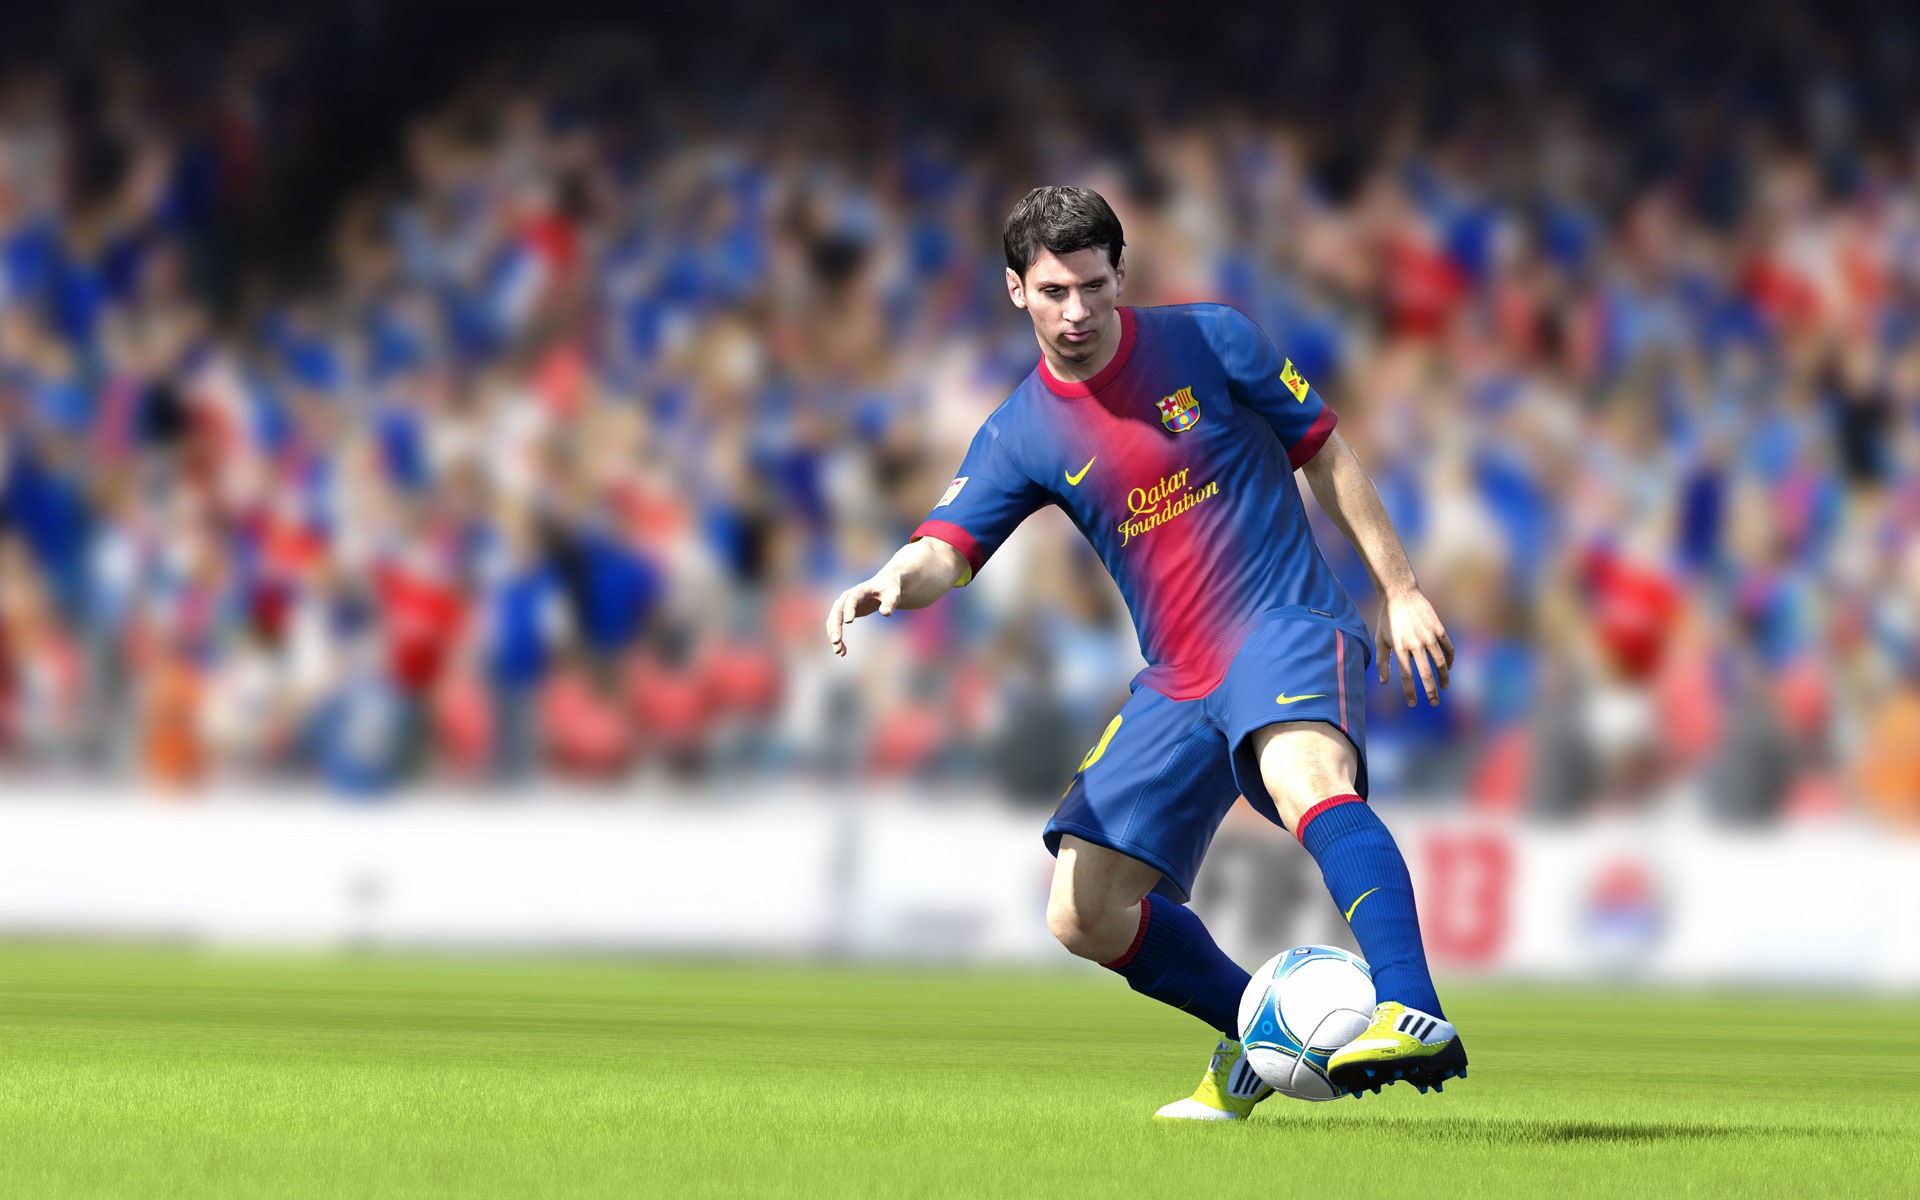 FIFA 13 game HD wallpapers #15 - 1920x1200